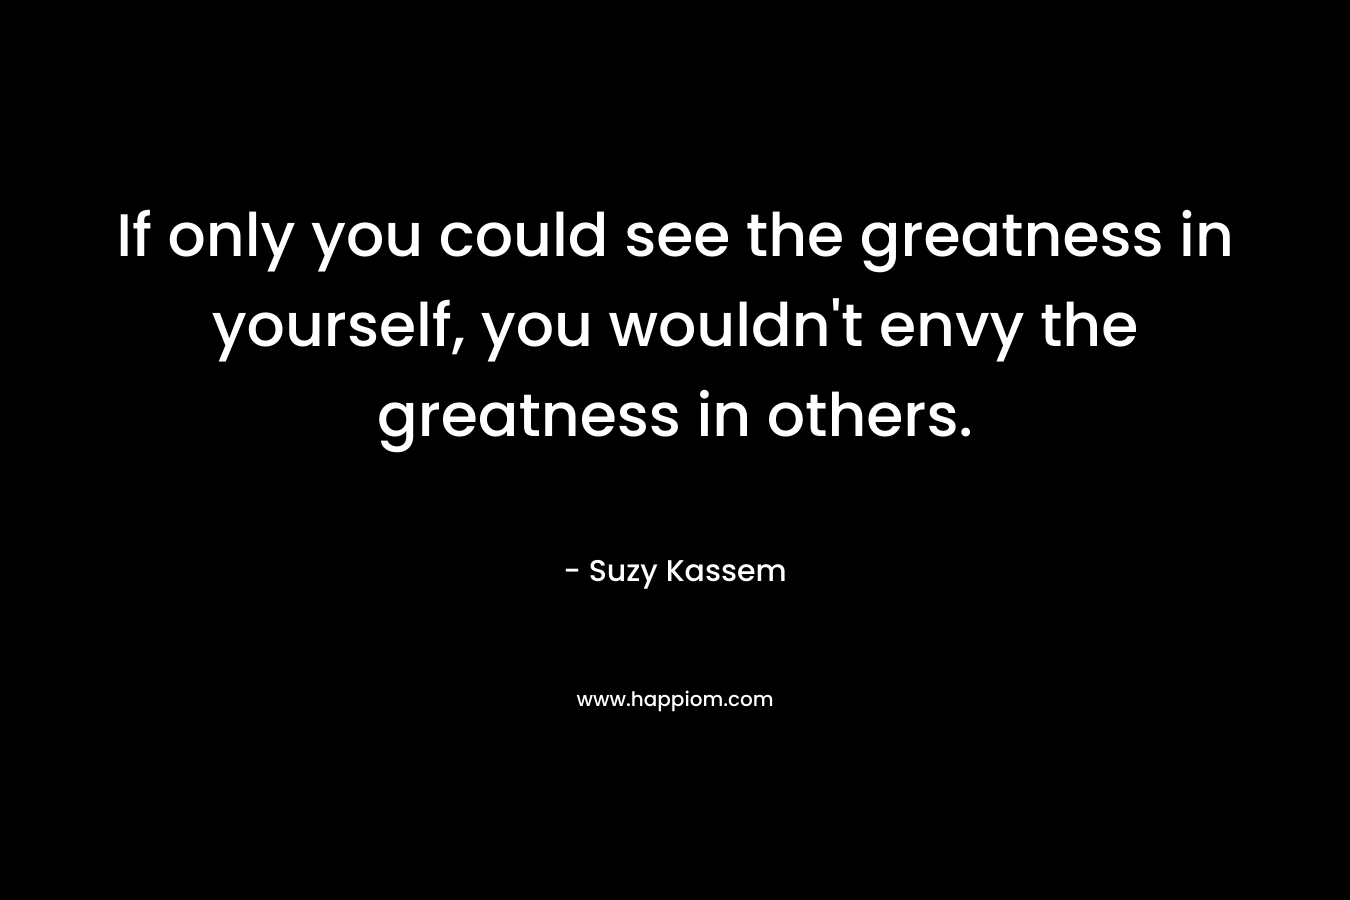 If only you could see the greatness in yourself, you wouldn't envy the greatness in others.